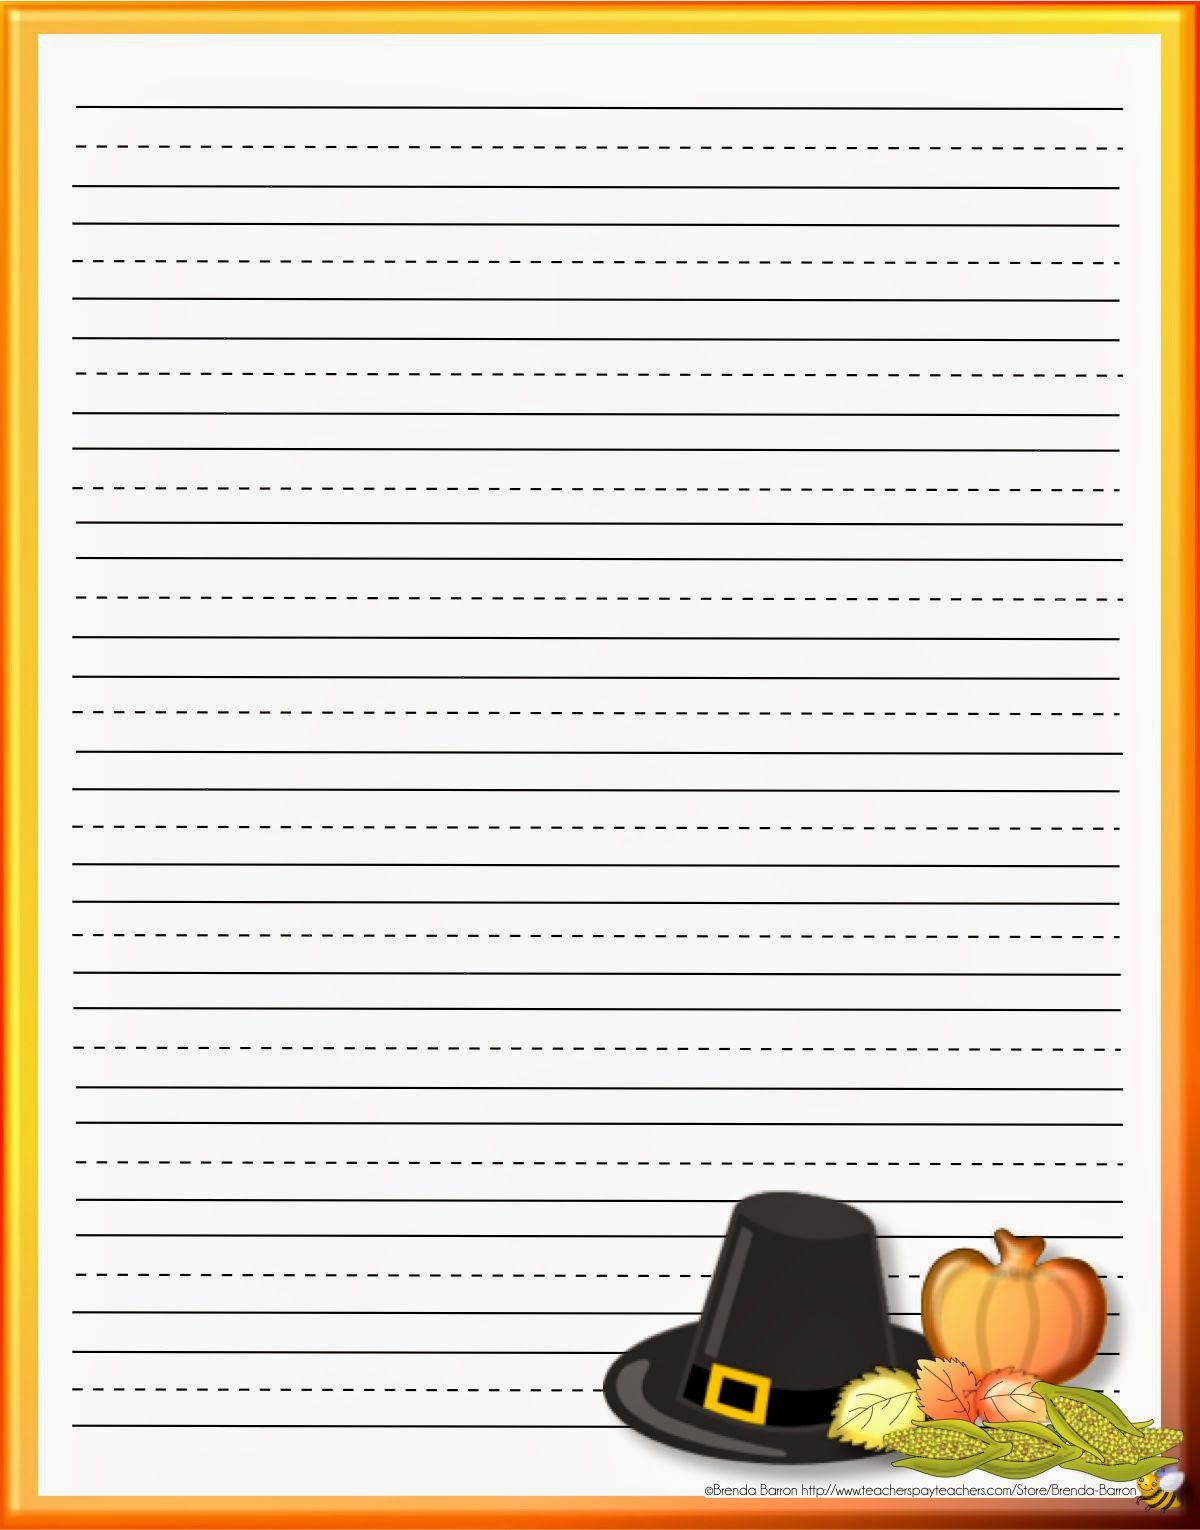 Everyday Teaching 2 Go! Free Thanksgiving Stationery (Primary Lines)